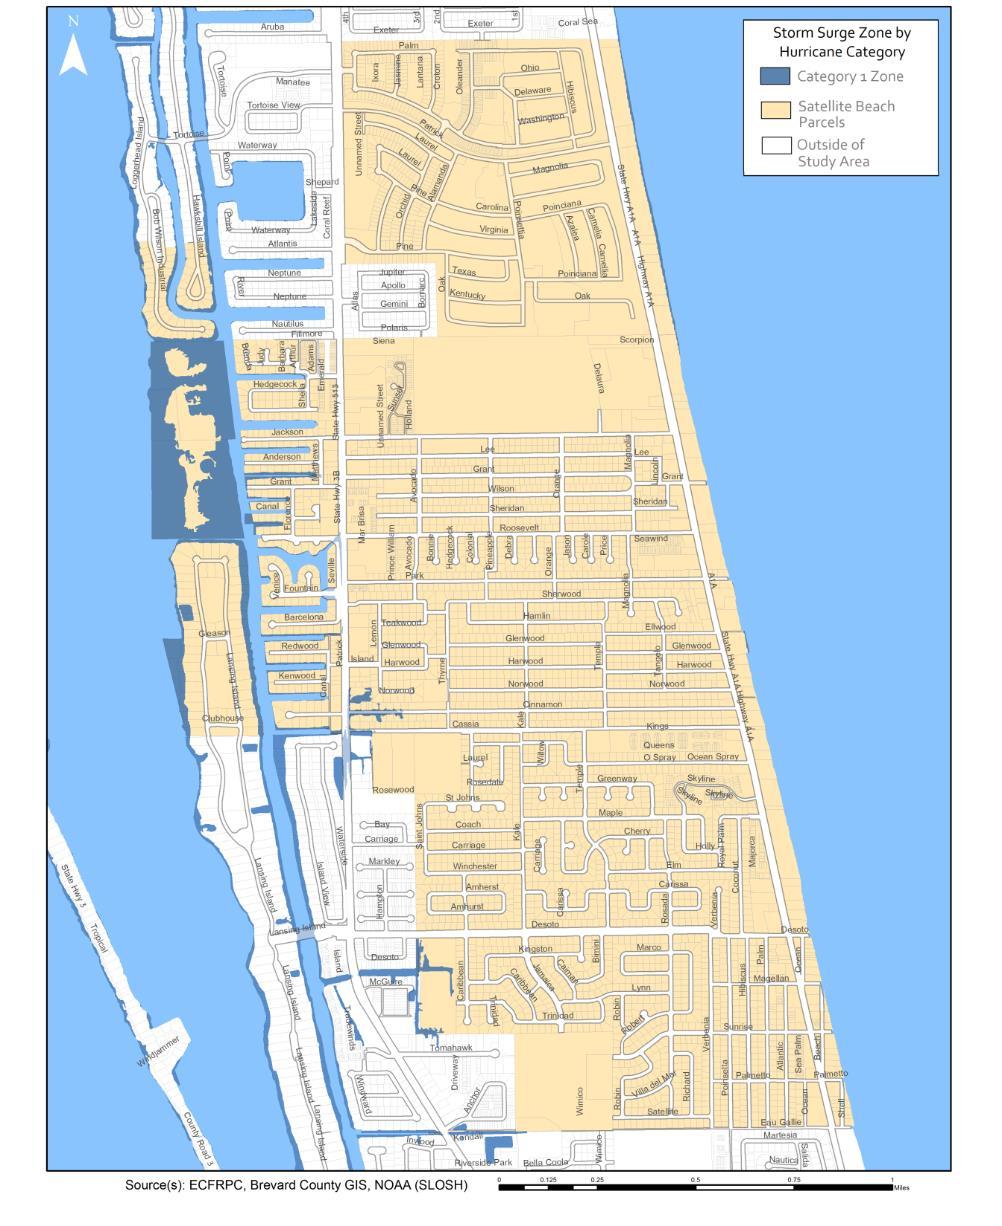 City of Satellite Beach Intro Situated on an barrier island between the Banana River and the Atlantic Ocean 15 miles south of Cape Canaveral Air Force